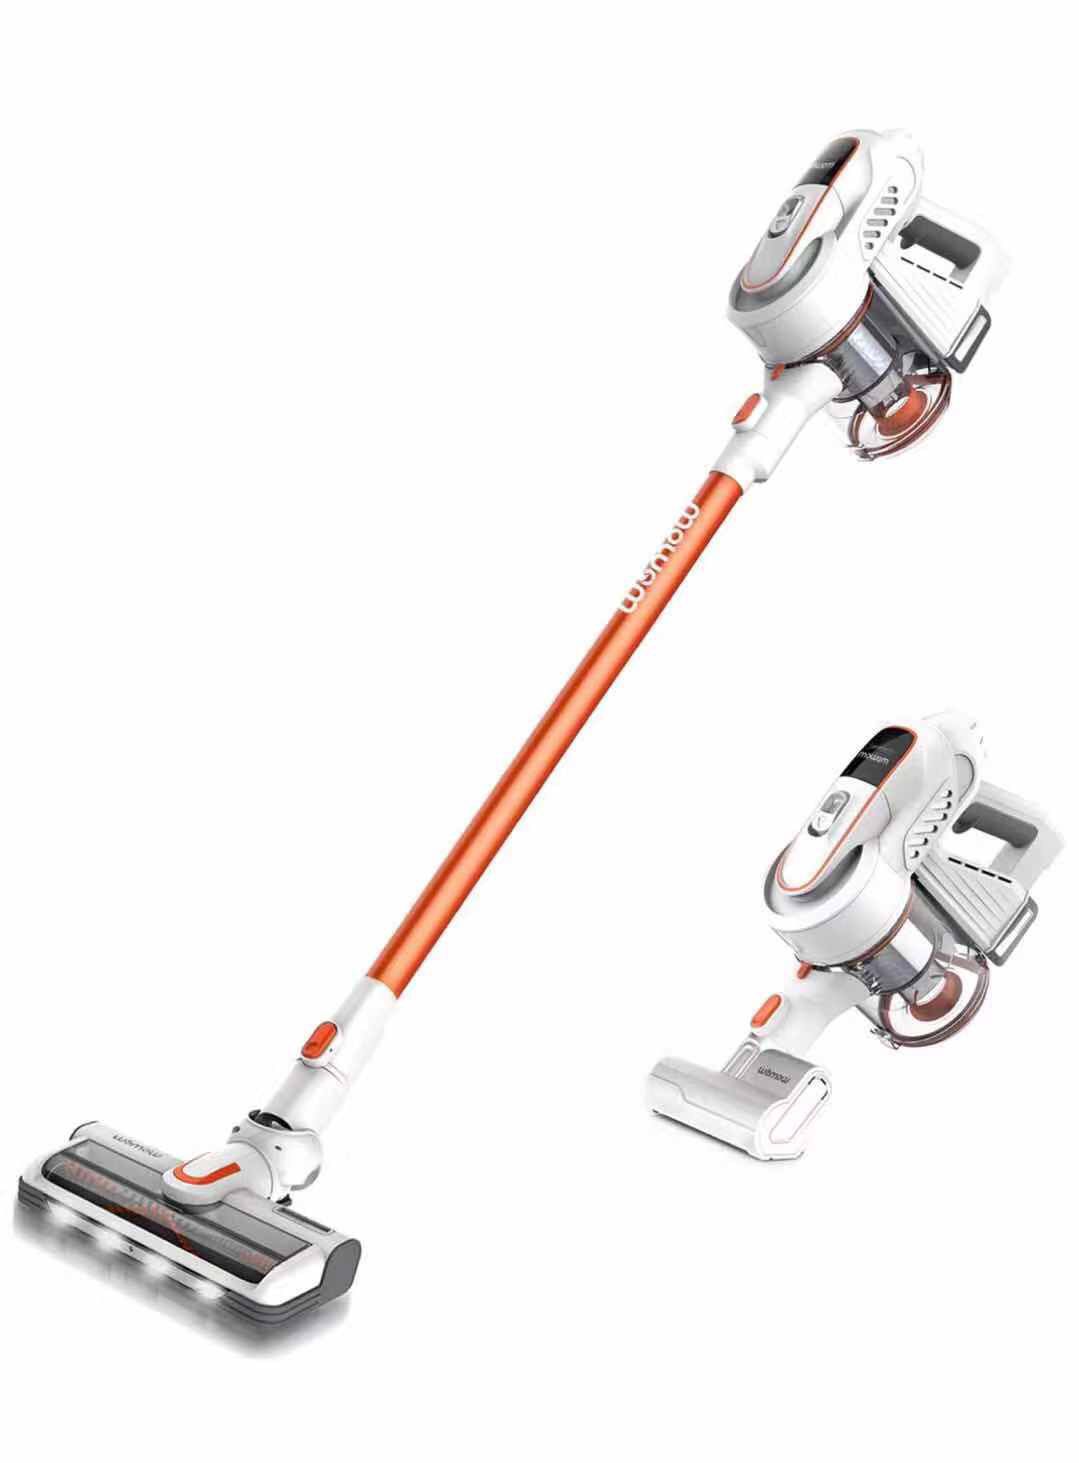 W9 Cordless Stick Vacuum Cleaner, 300W Brushless Motor, 16000pa Powerful Suction,HEPA Filter, Lightweight 2 in 1 Handheld Vacuum with LED Carpet Brus